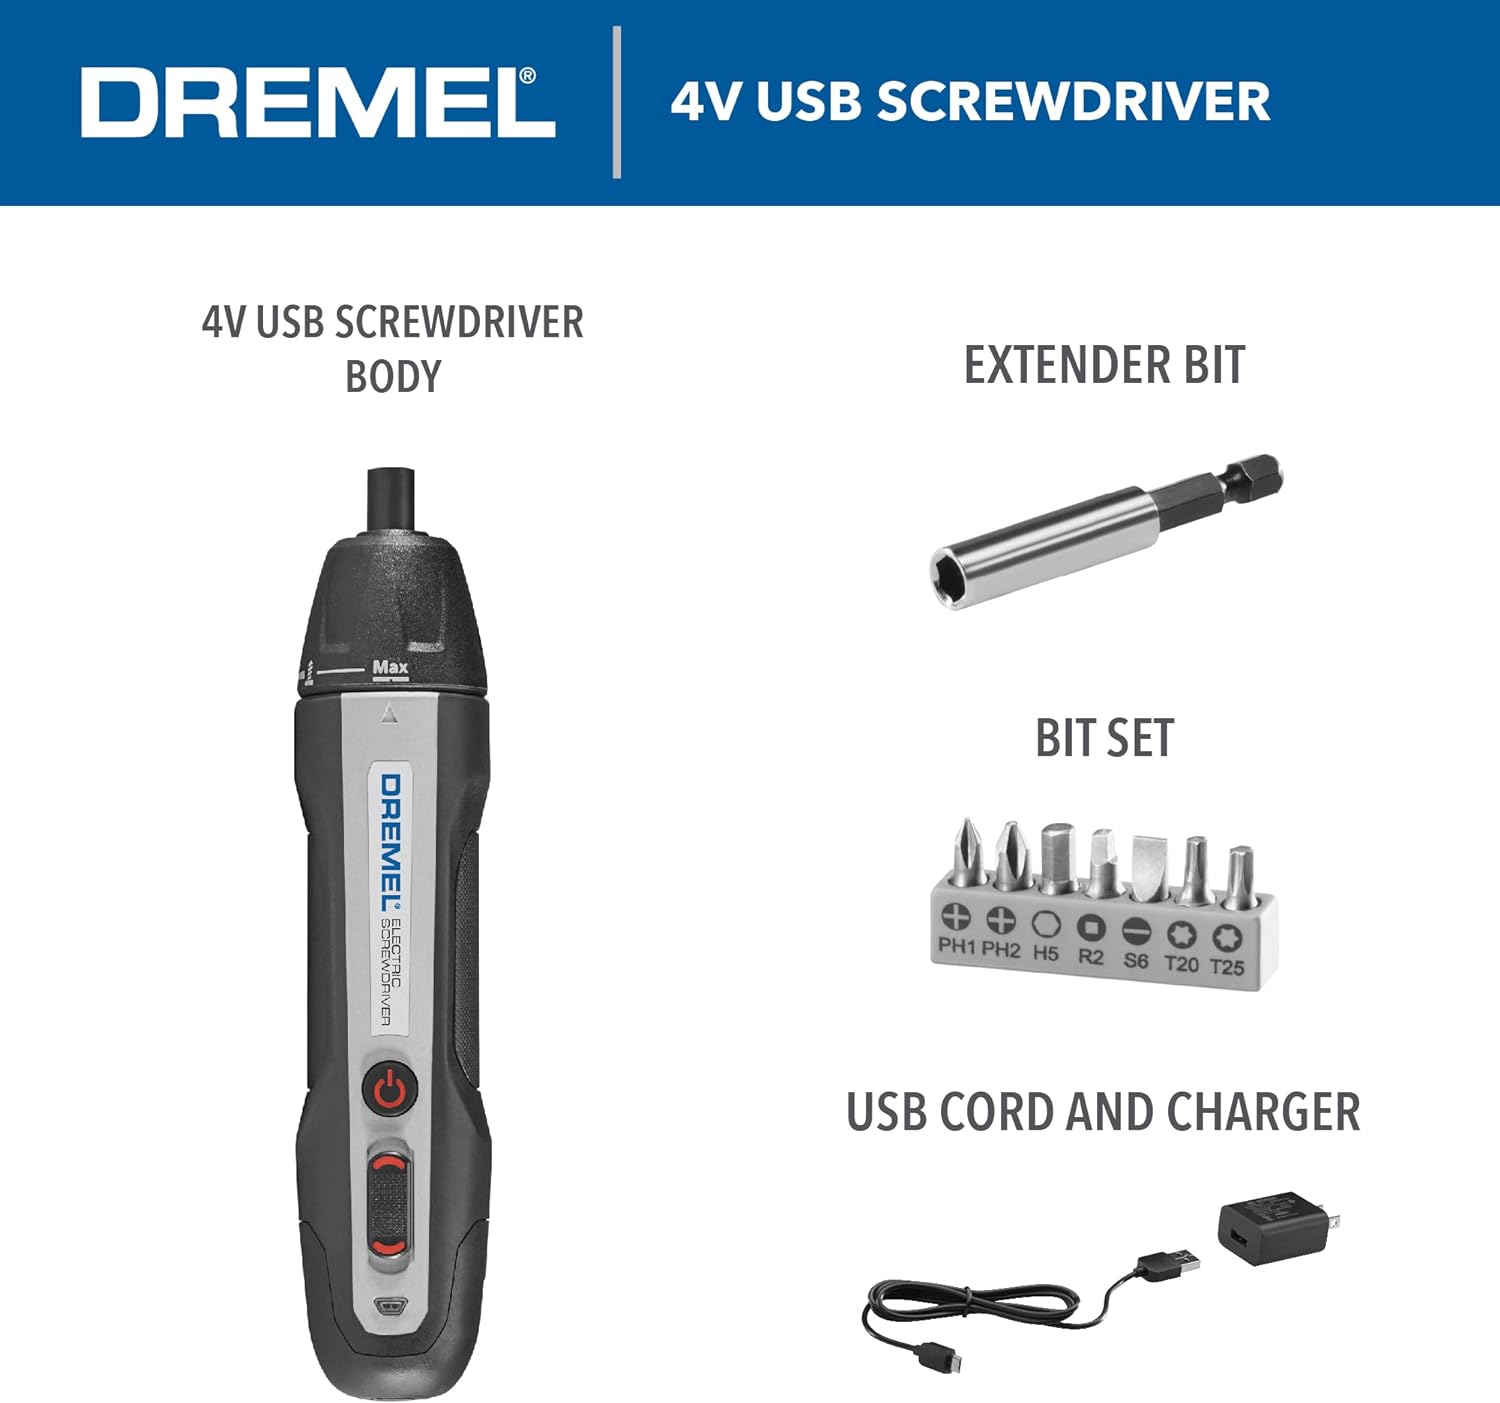 Dremel HSES-01 4V Cordless USB Rechargeable Electric Screwdriver Kit with 6 Power Settings and Smart Stop Technology - Includes 7 Scre